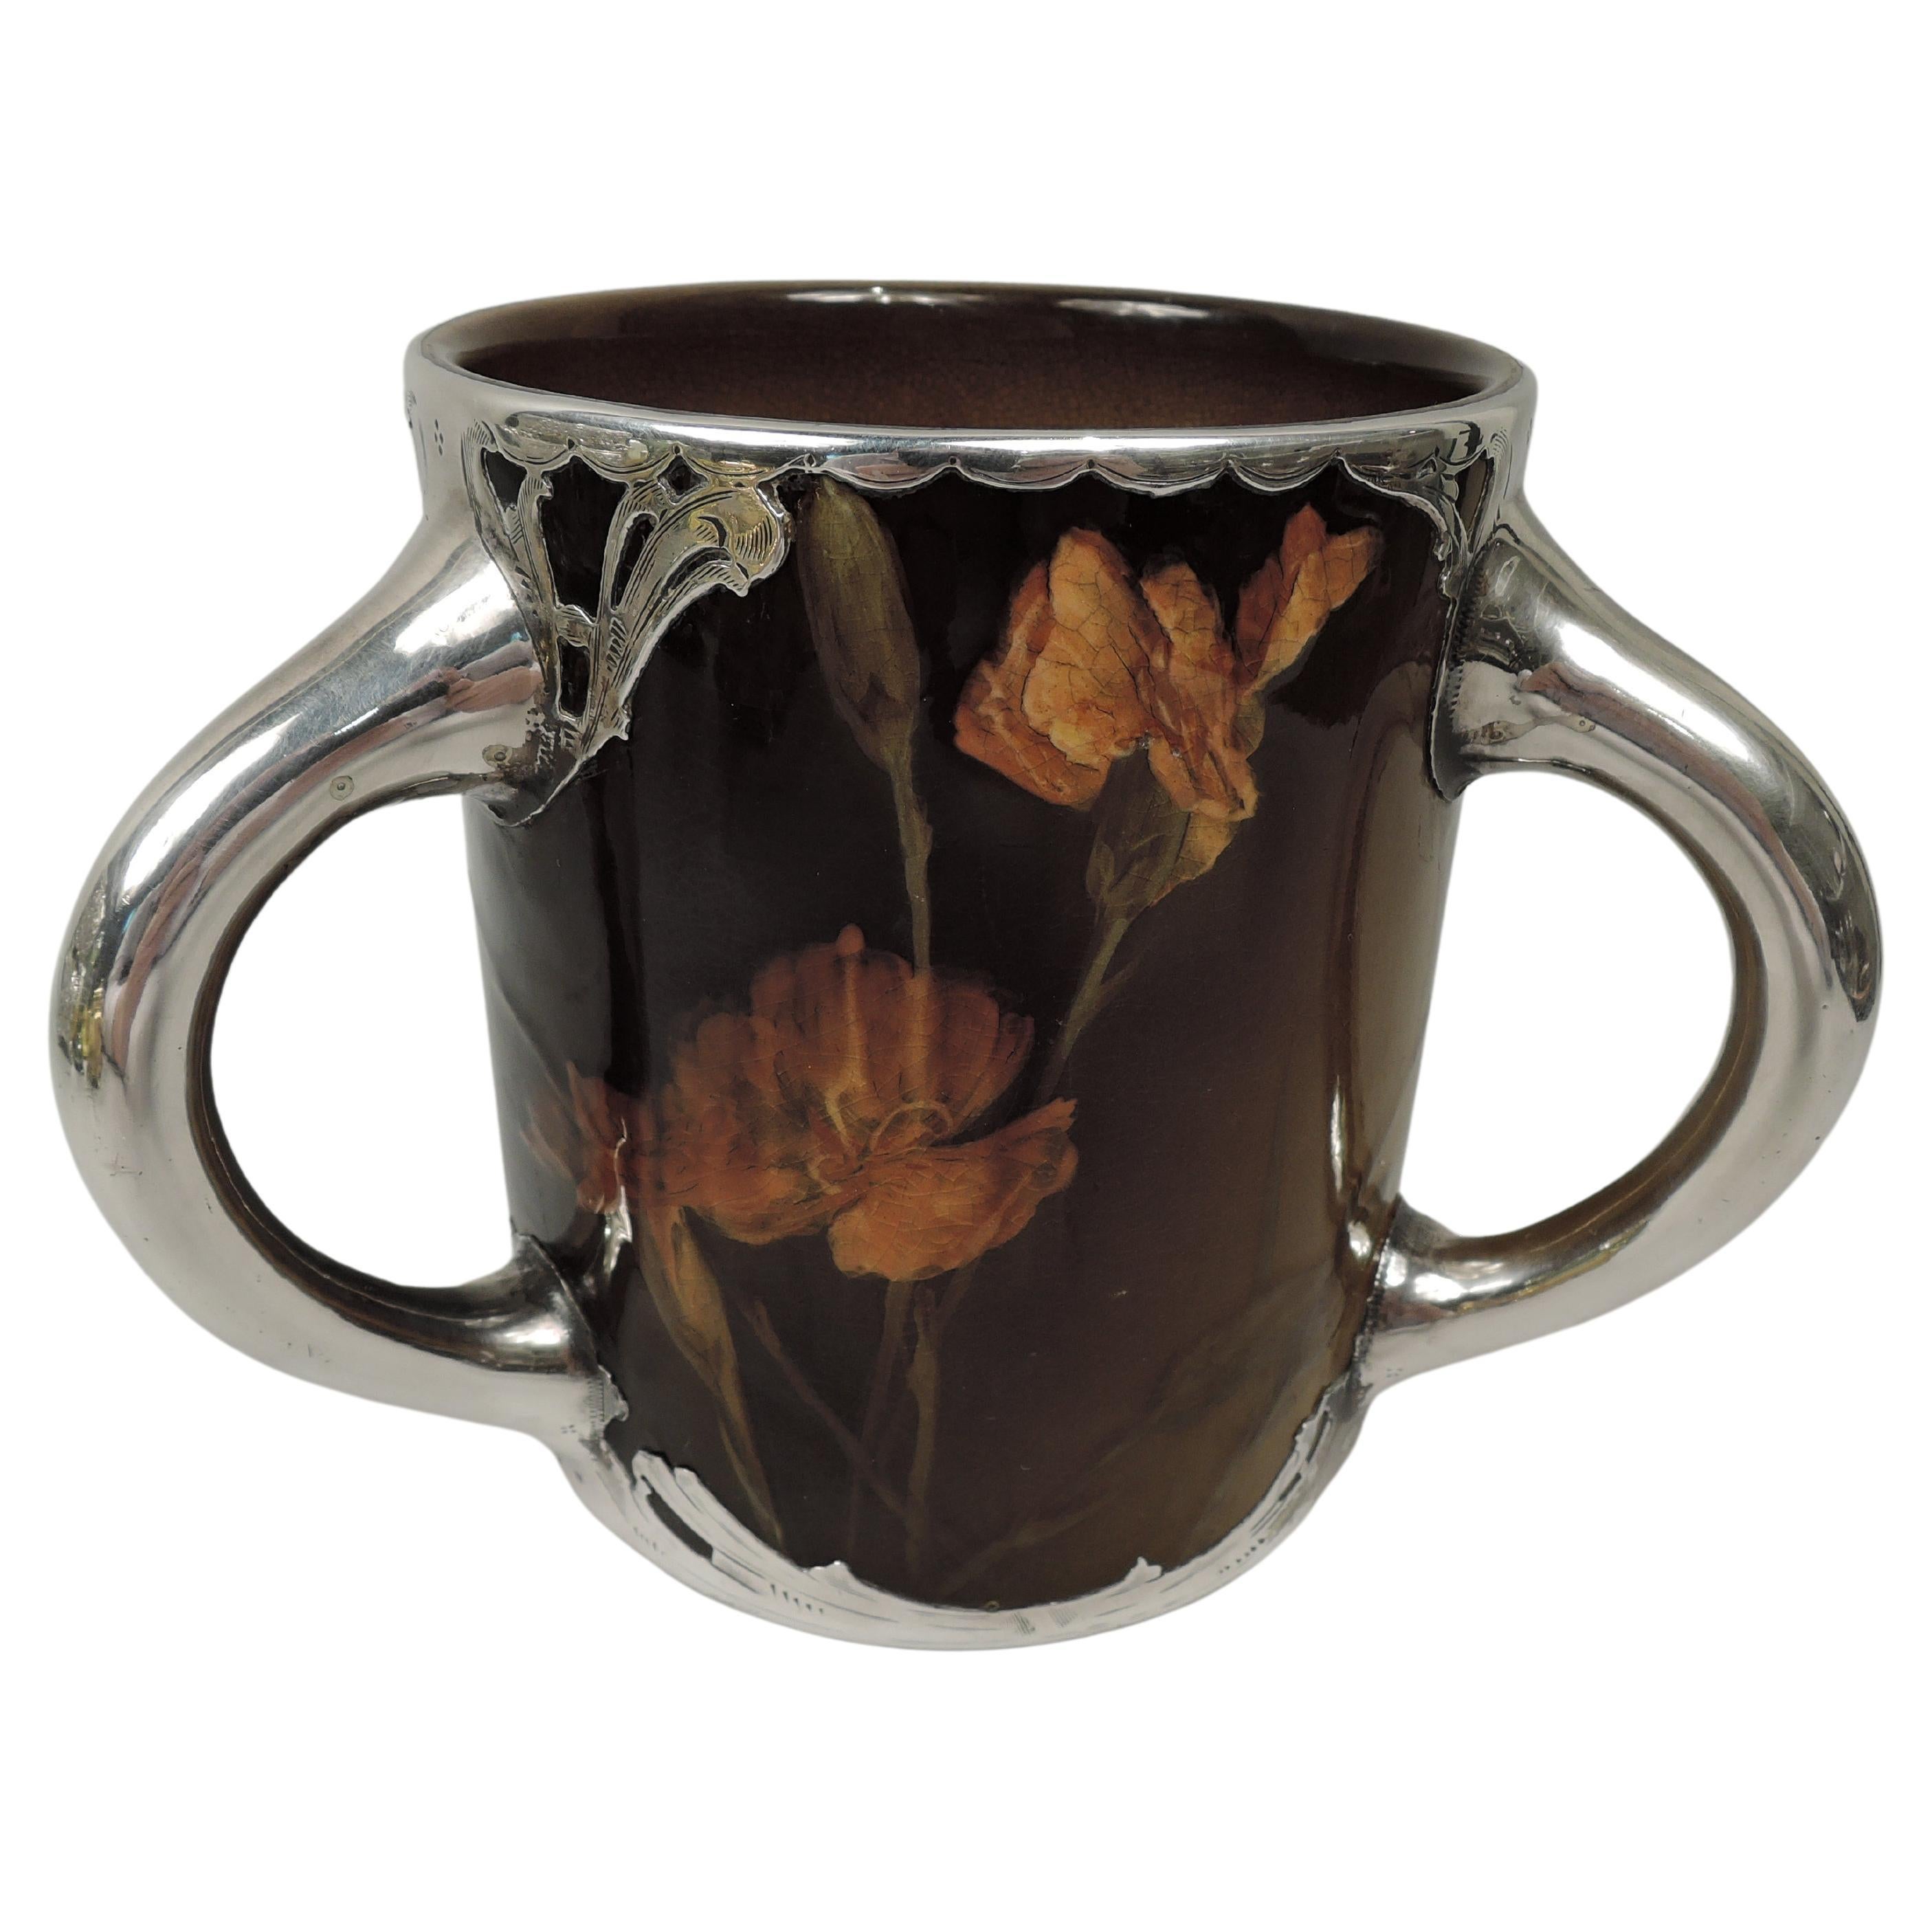 Rookwood Art Nouveau Craftsman Silver Overlay Loving Cup with Flowers